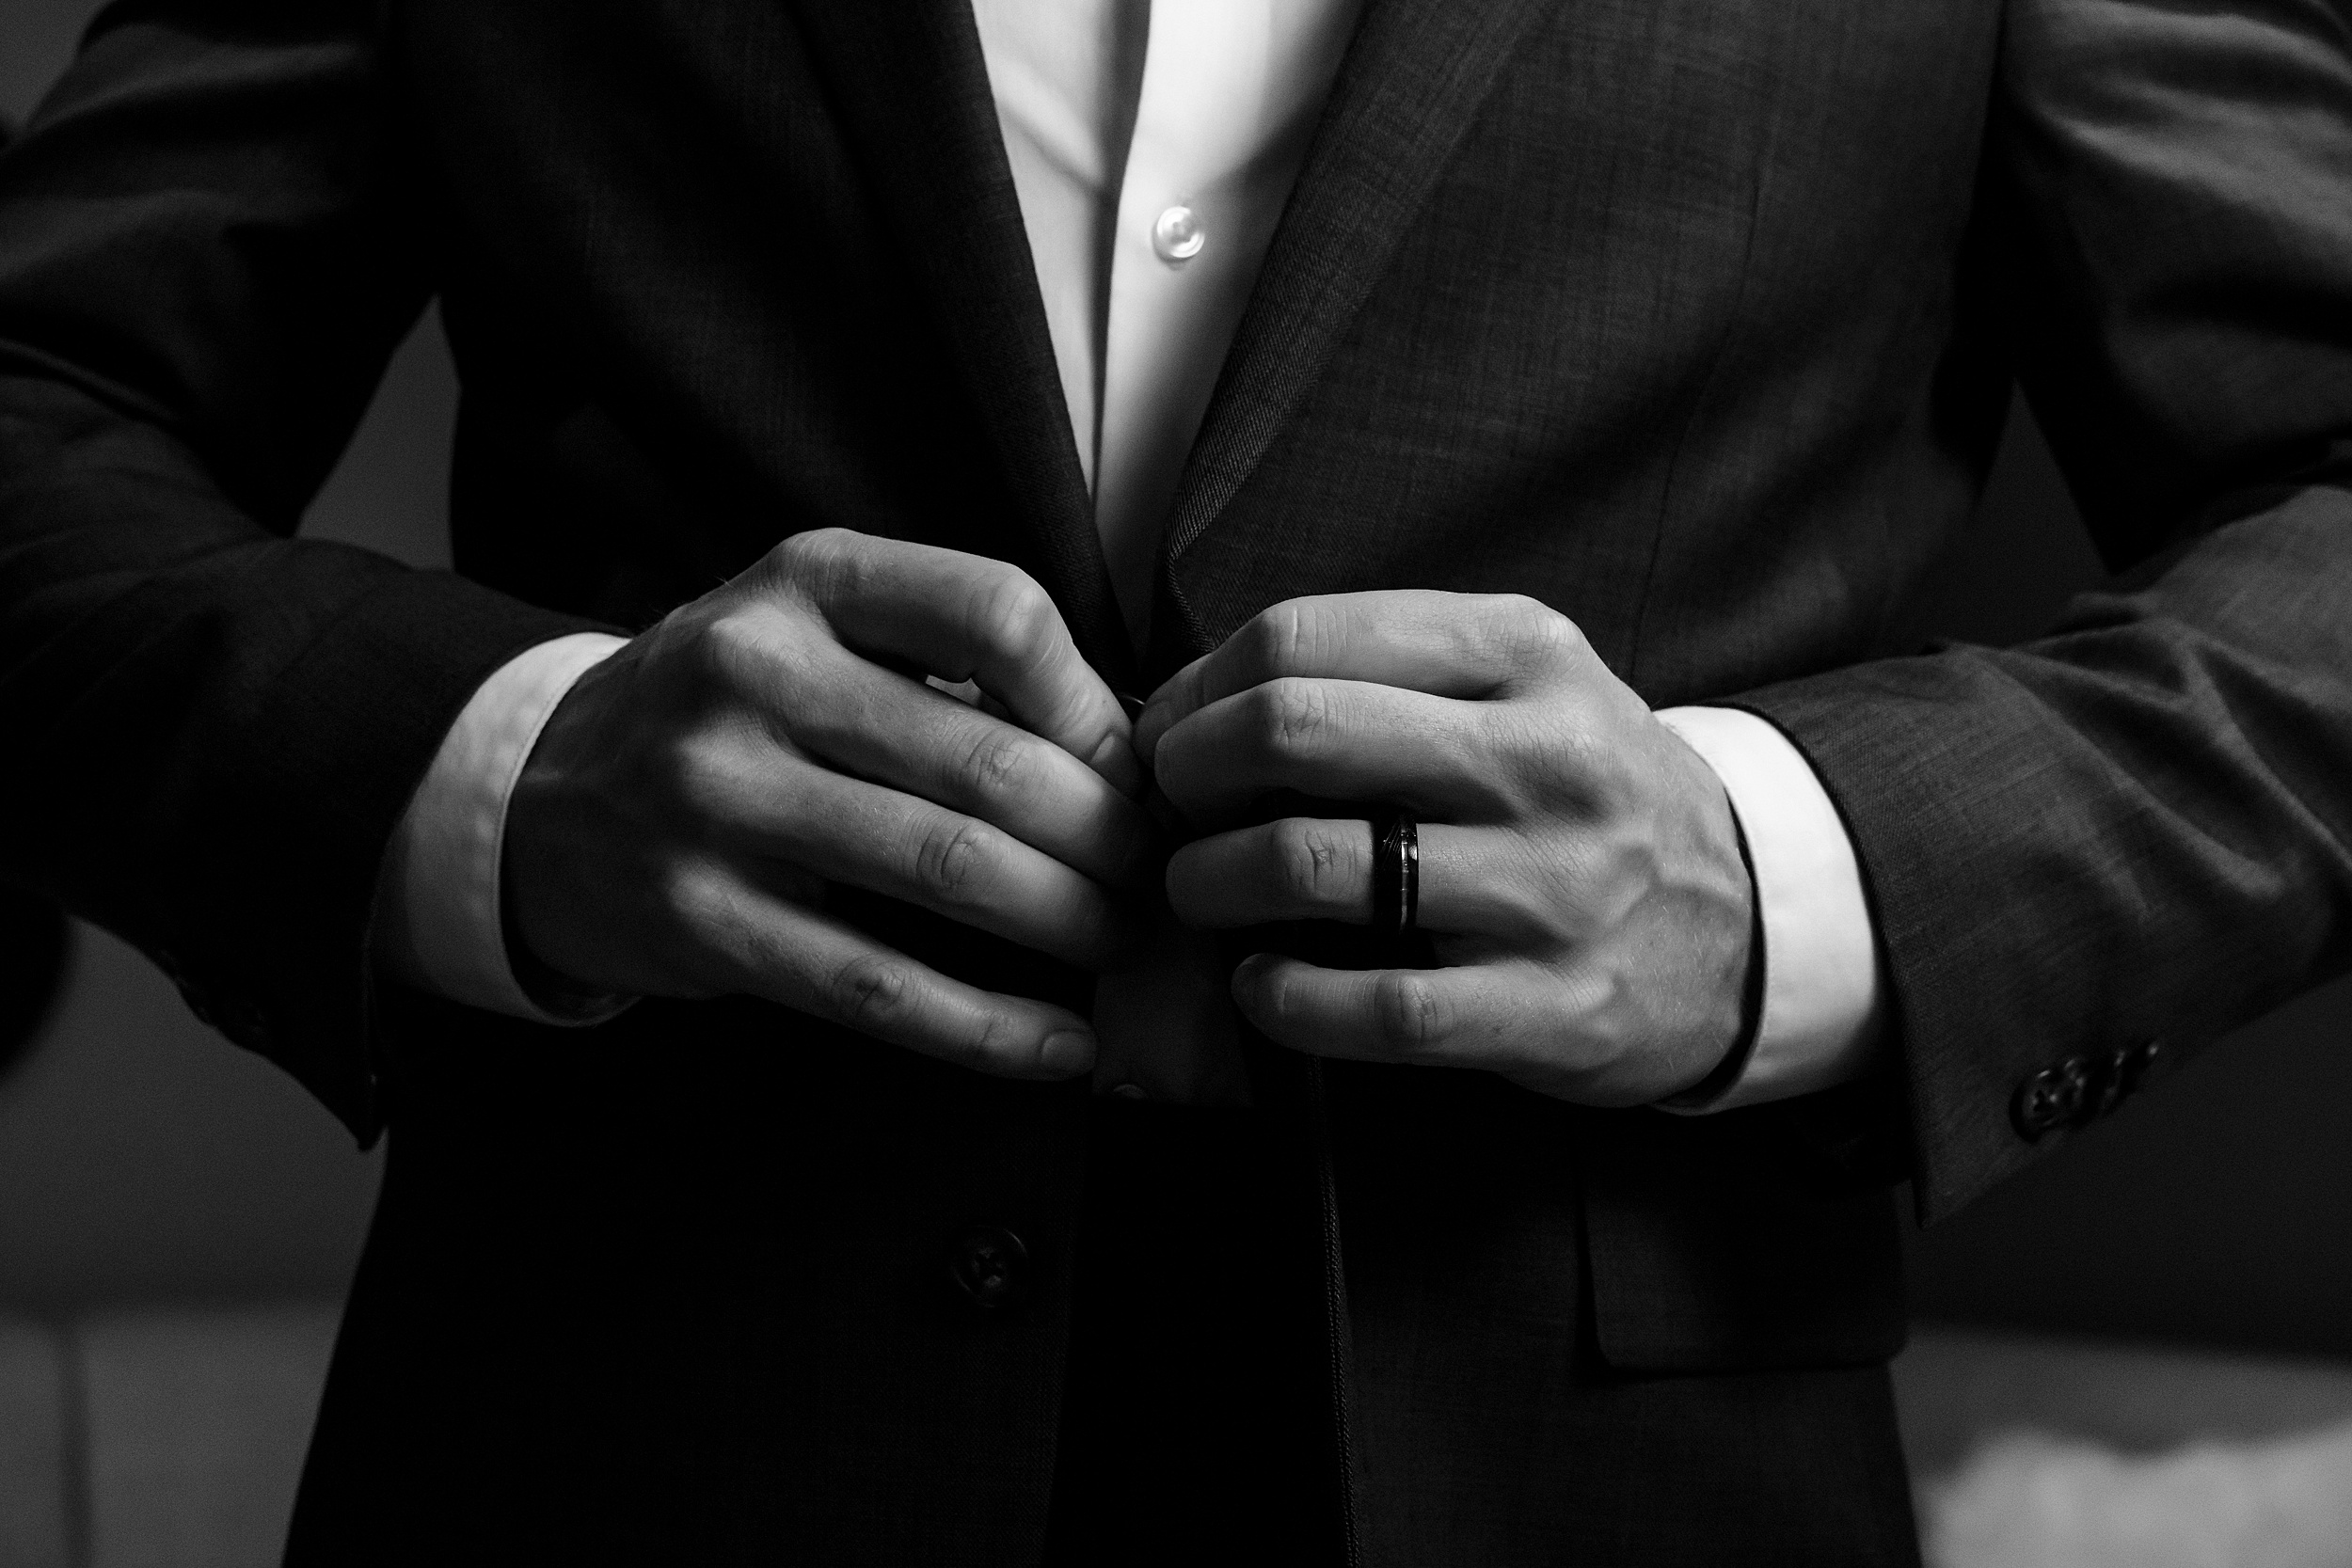 Details of a groom buttoning his suit in dramatic lighting